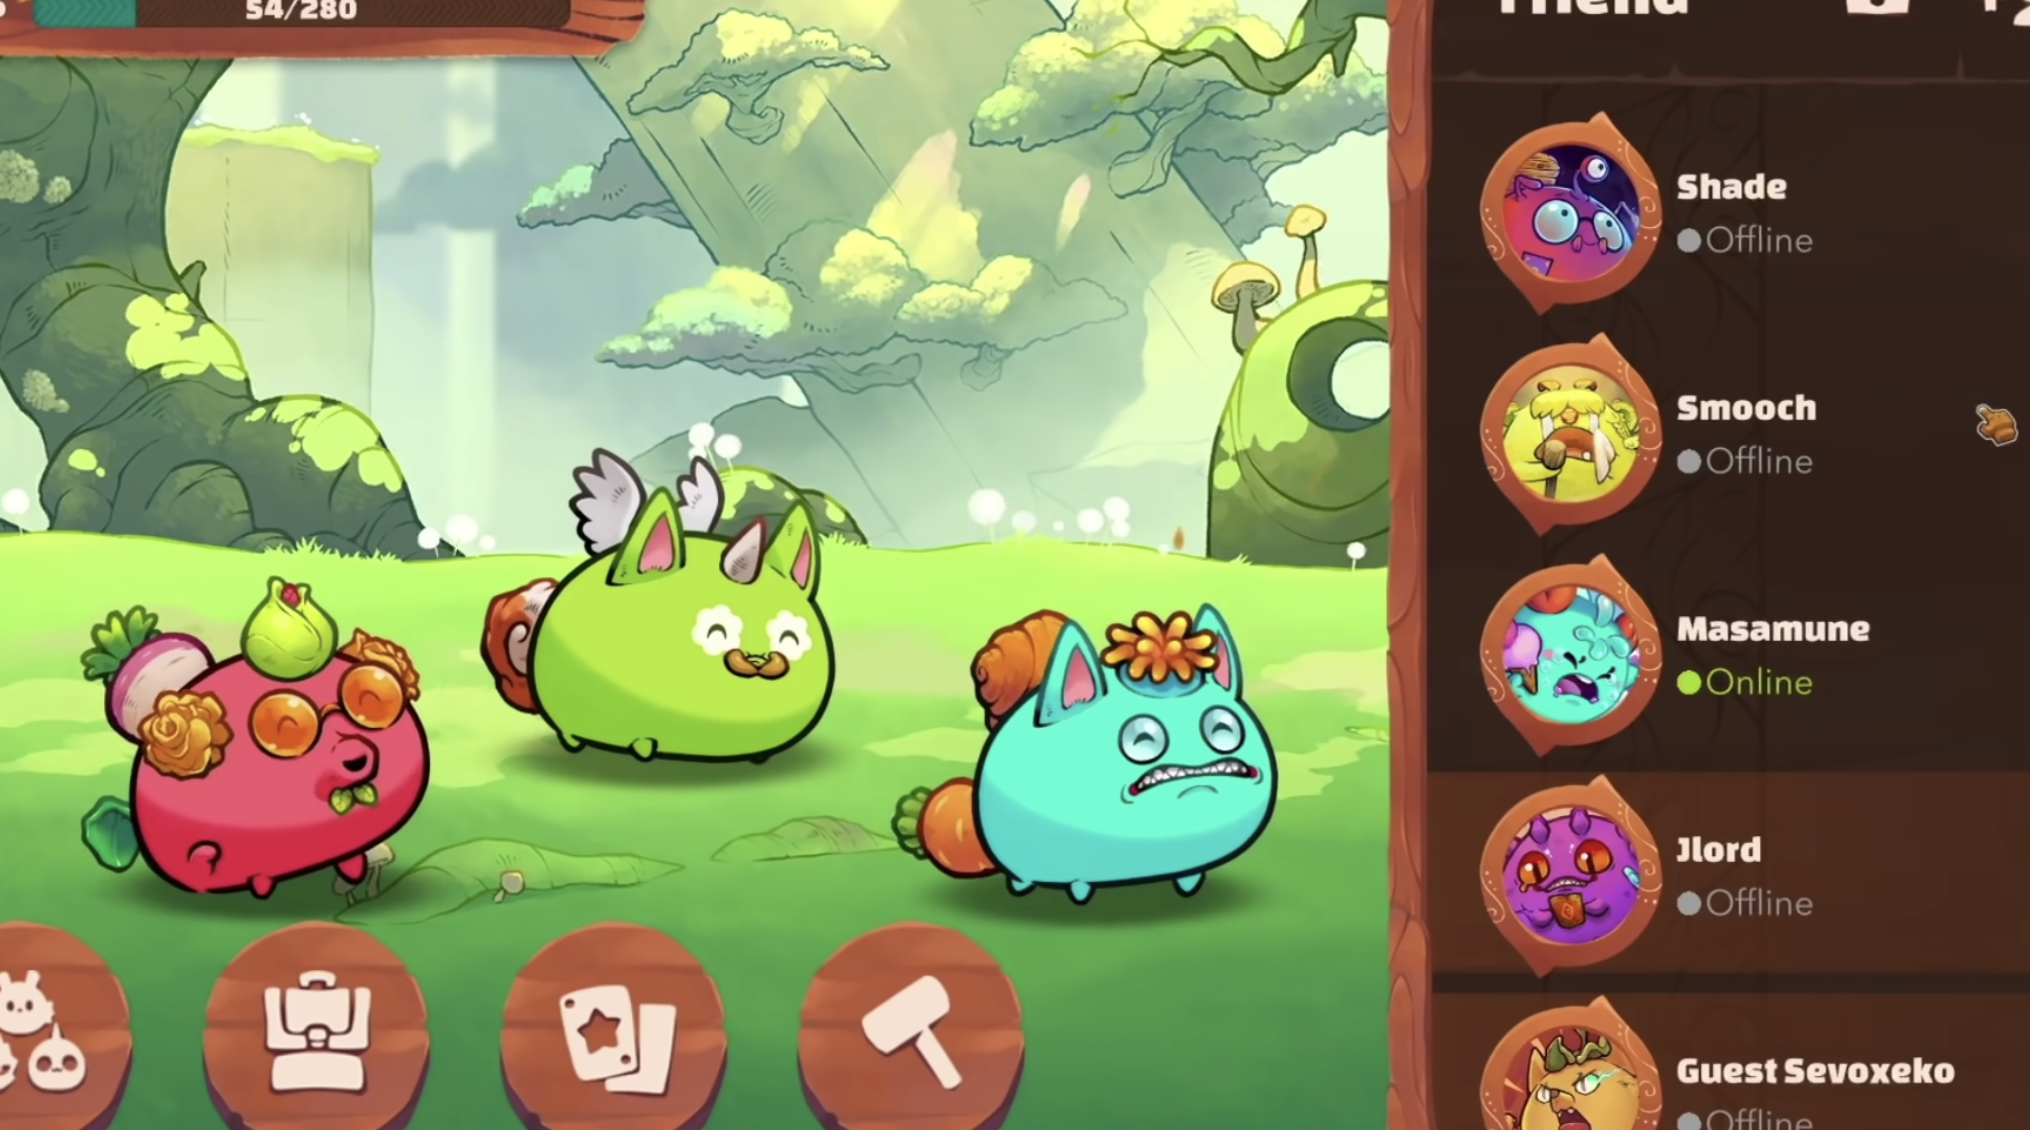 A screenshot of the blockchain game Axie Infinity to illustrate the future of nfts gaming 